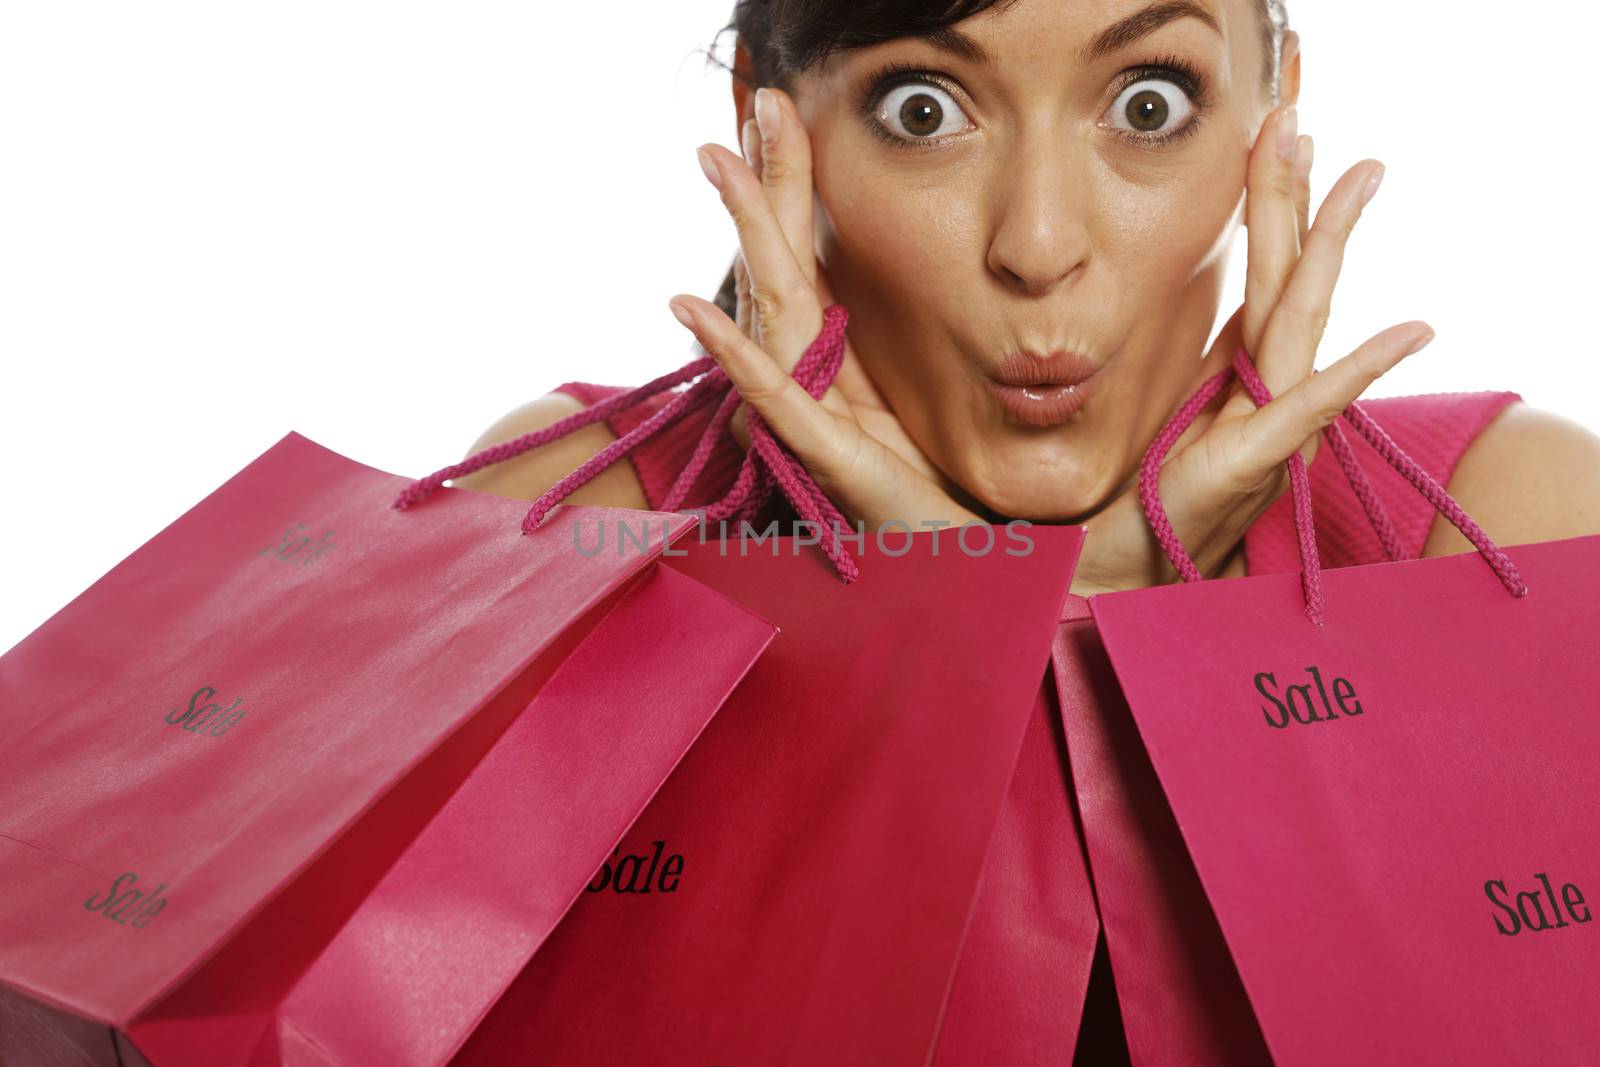 Young woman looking excited with shopping bags